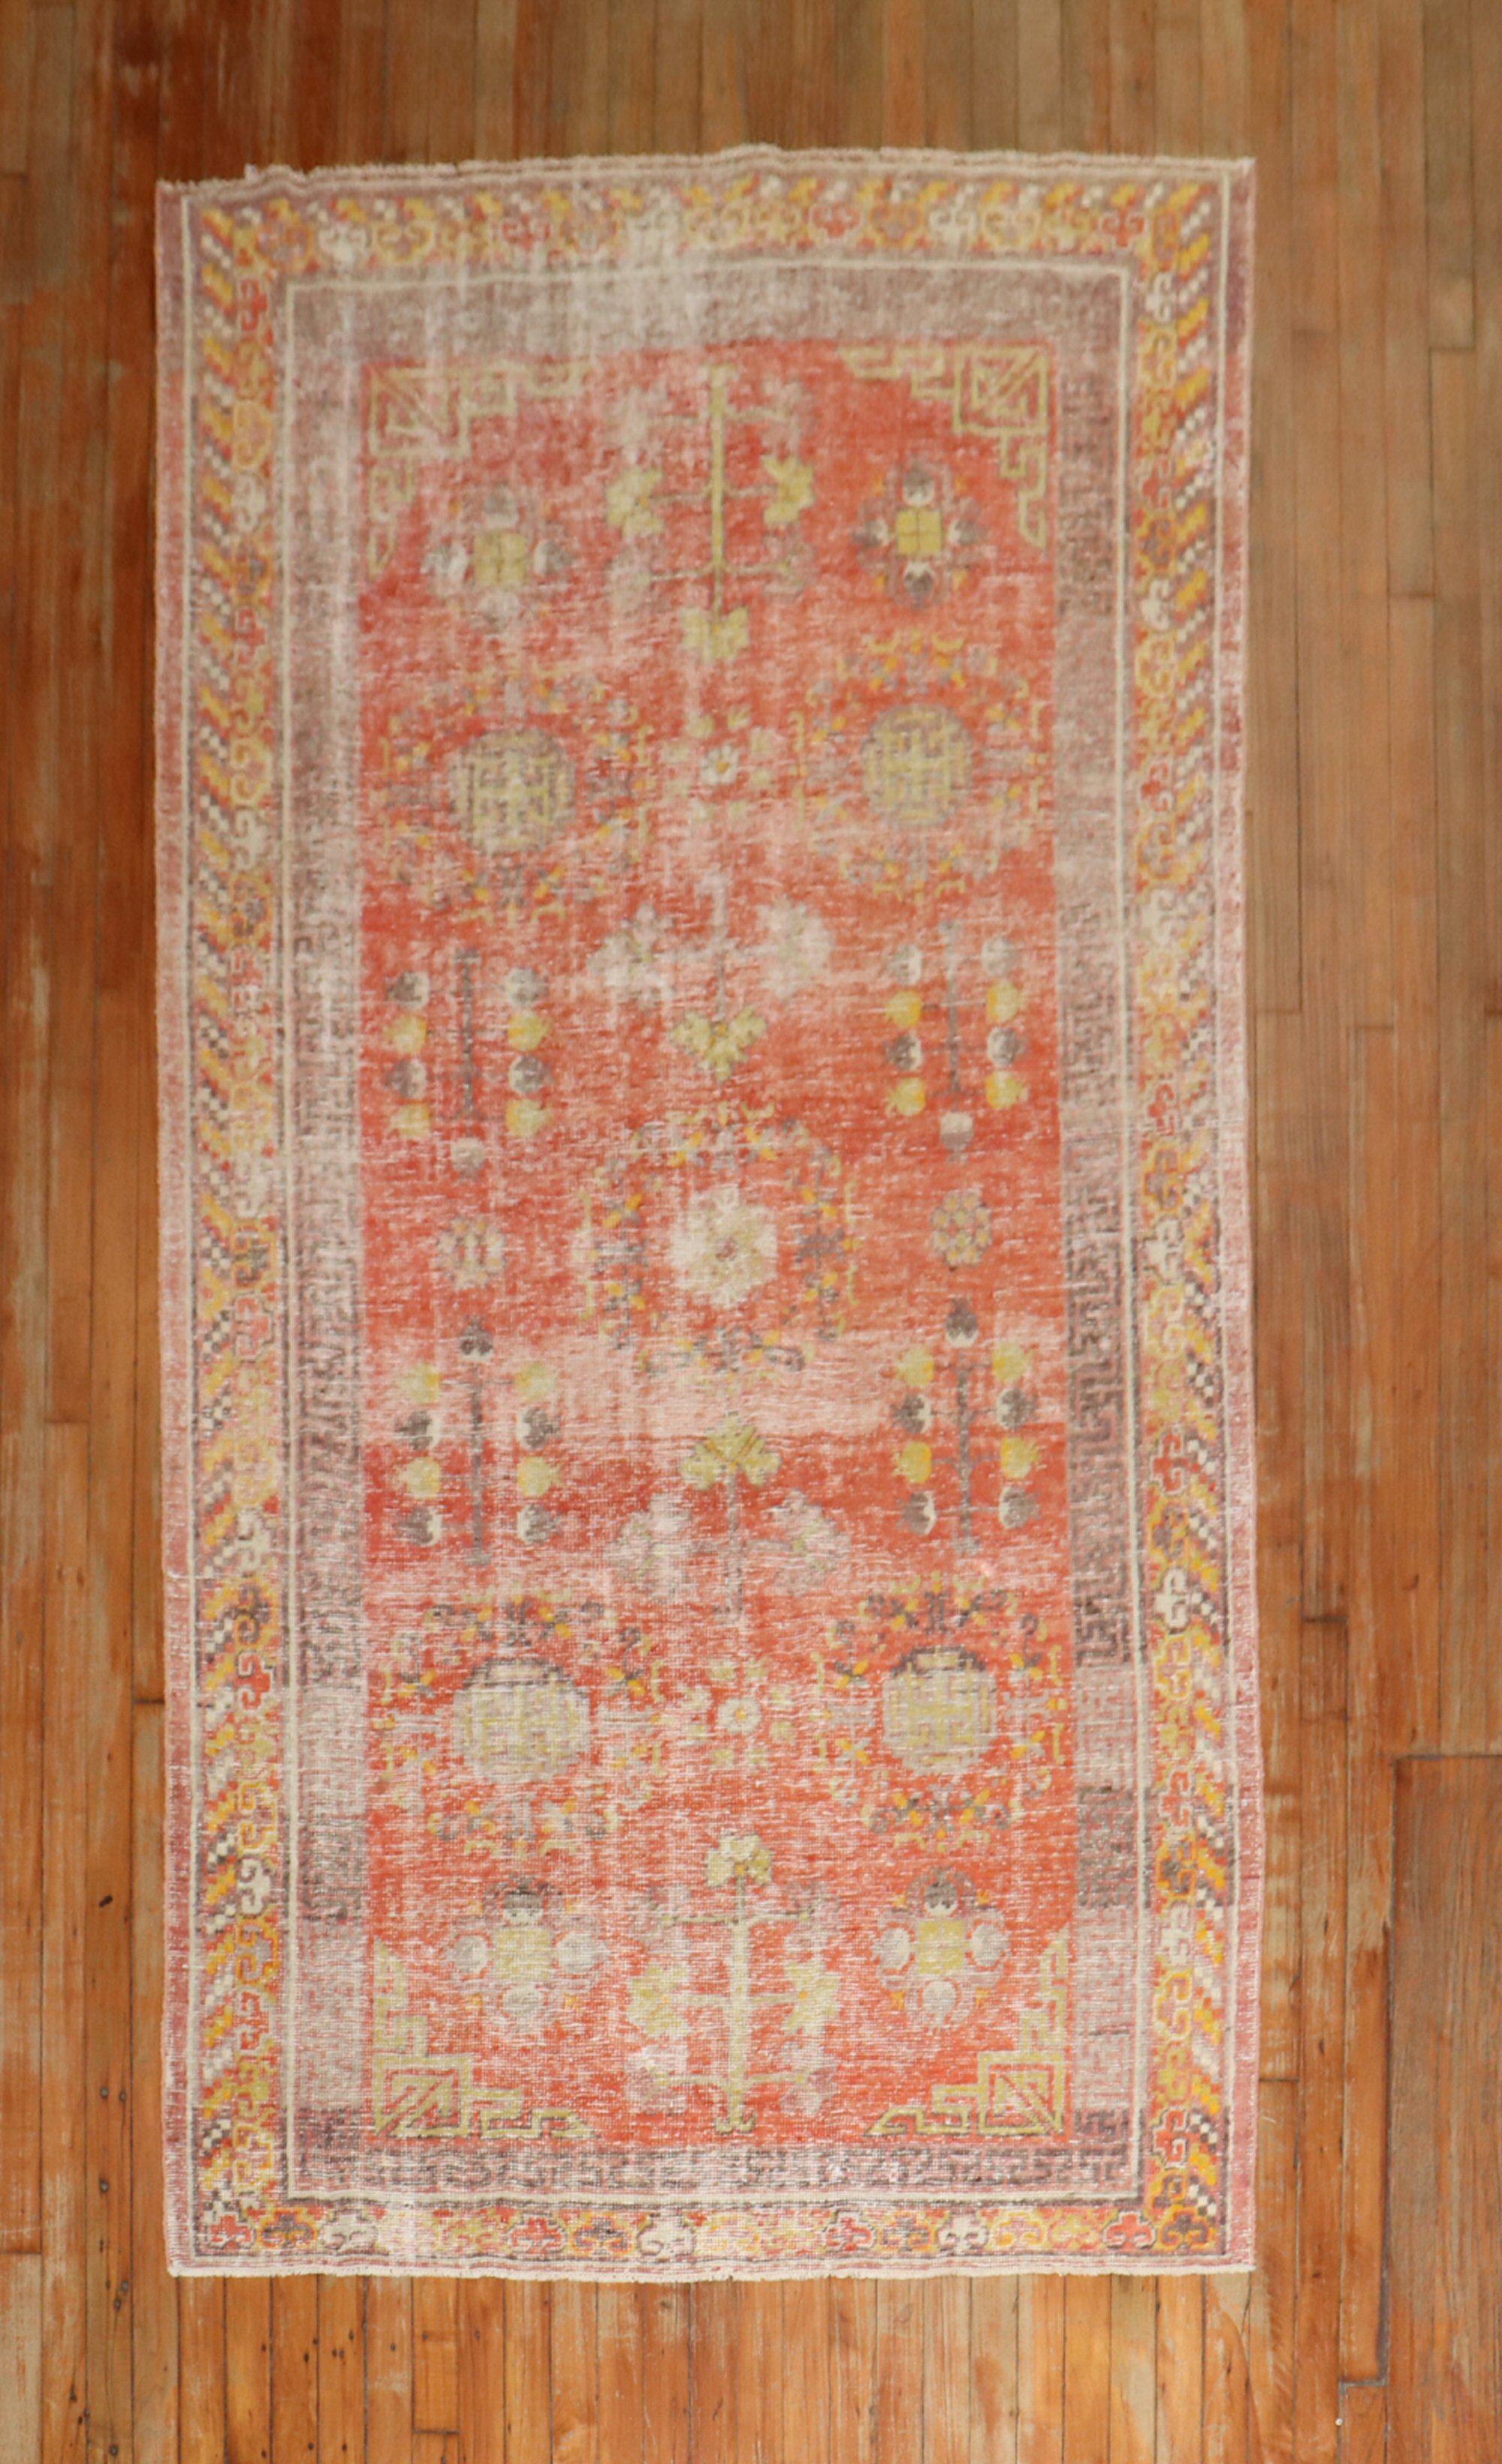 An early 20th-century antique Khotan rug in a predominant red melon color.

Measures: 4'5'' x 8'6''.